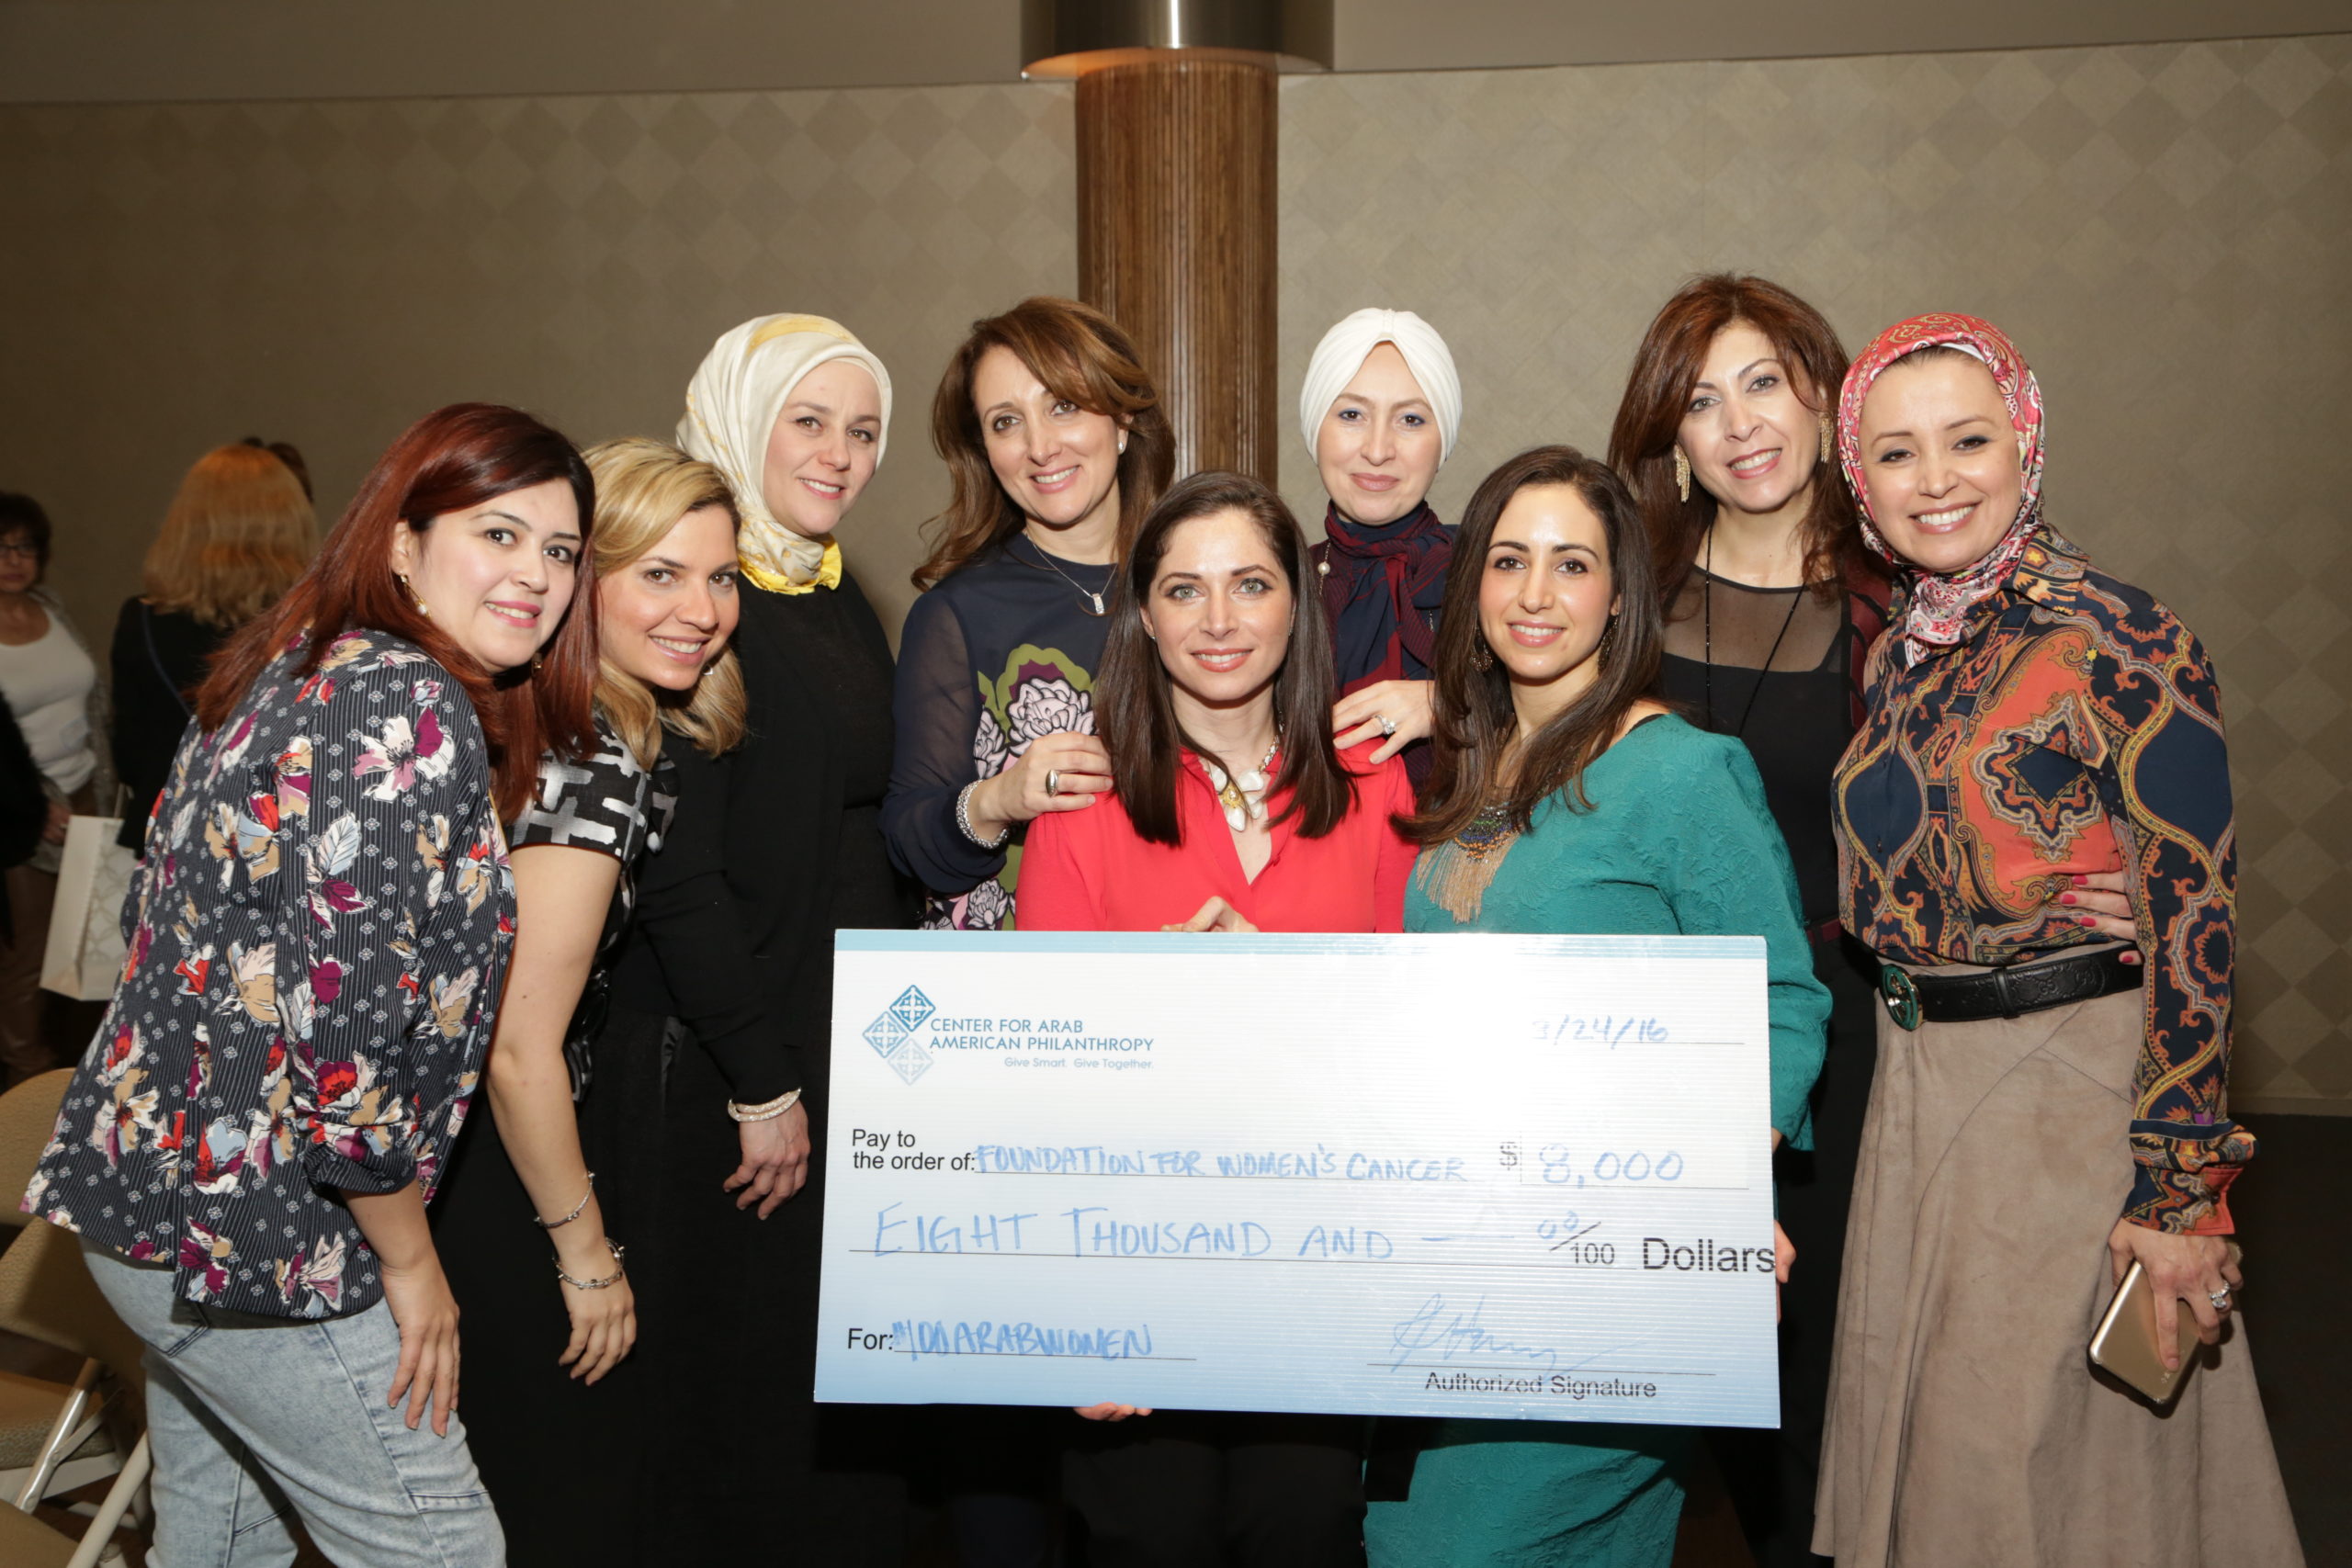 Photo courtesy of the Center for Arab American Philanthropy